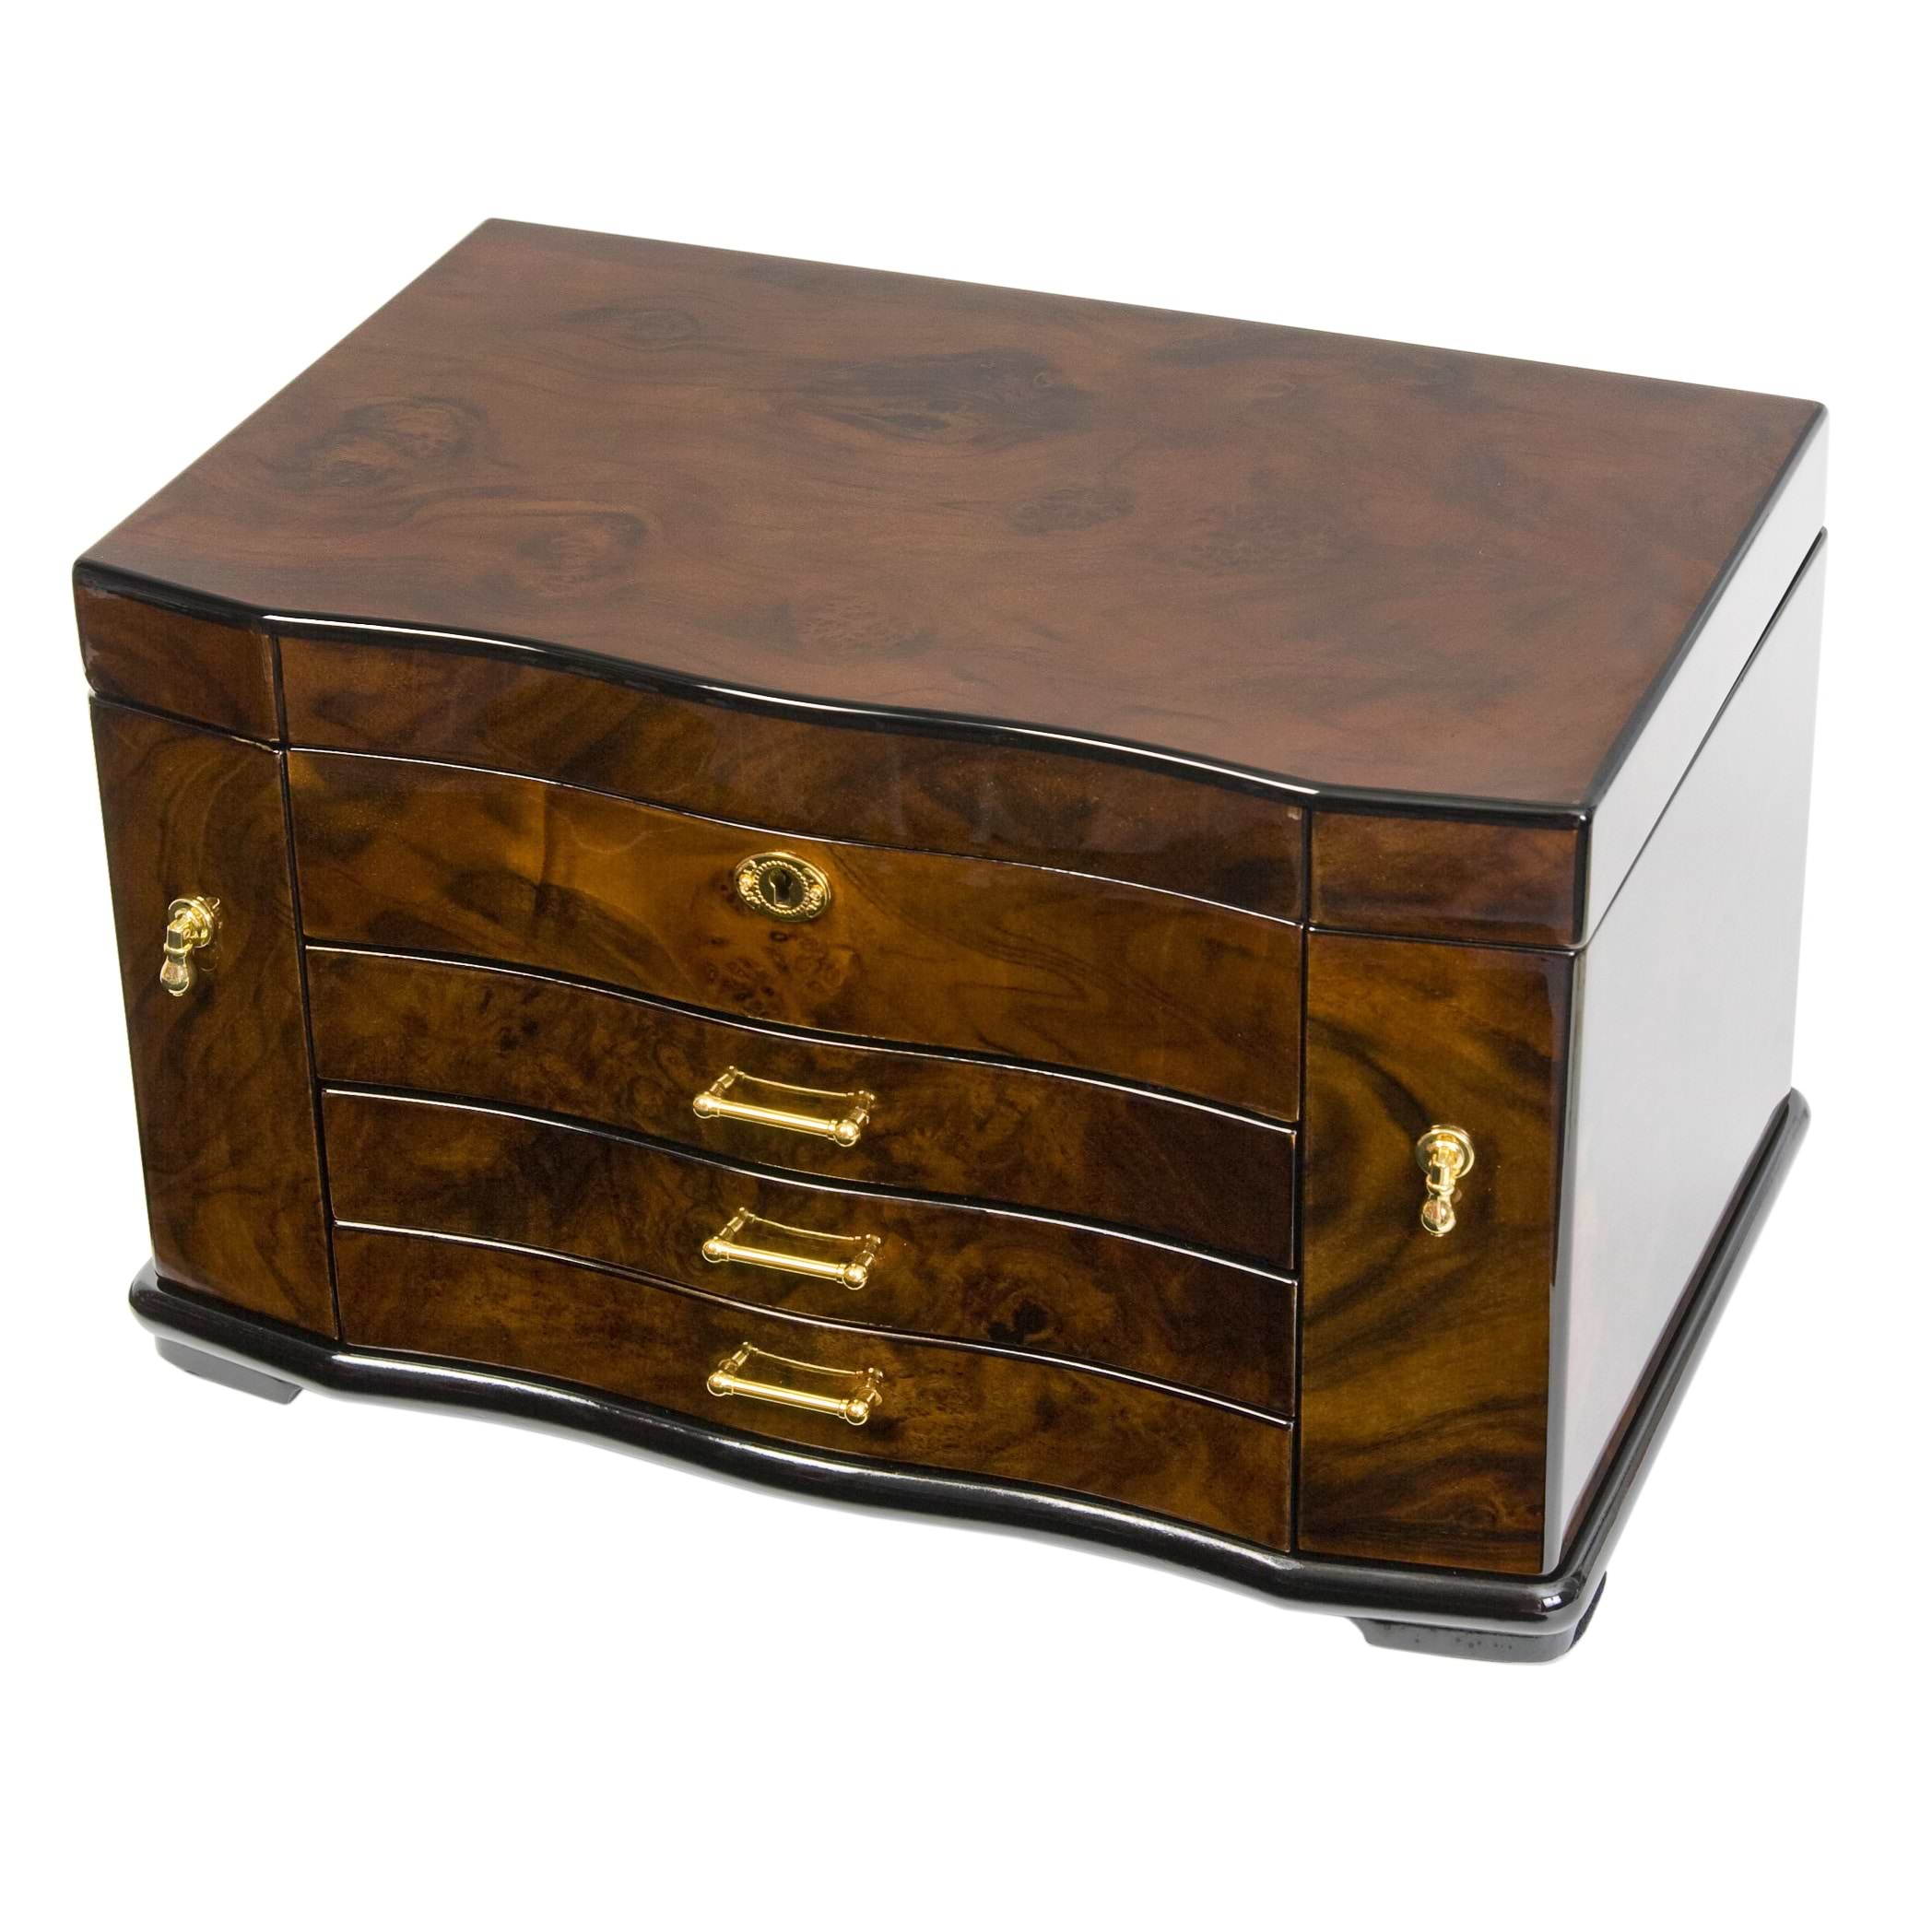 Walnut Burl Jewelry Box w 3 Pull-out Drawers & 2 Swing-out Doors